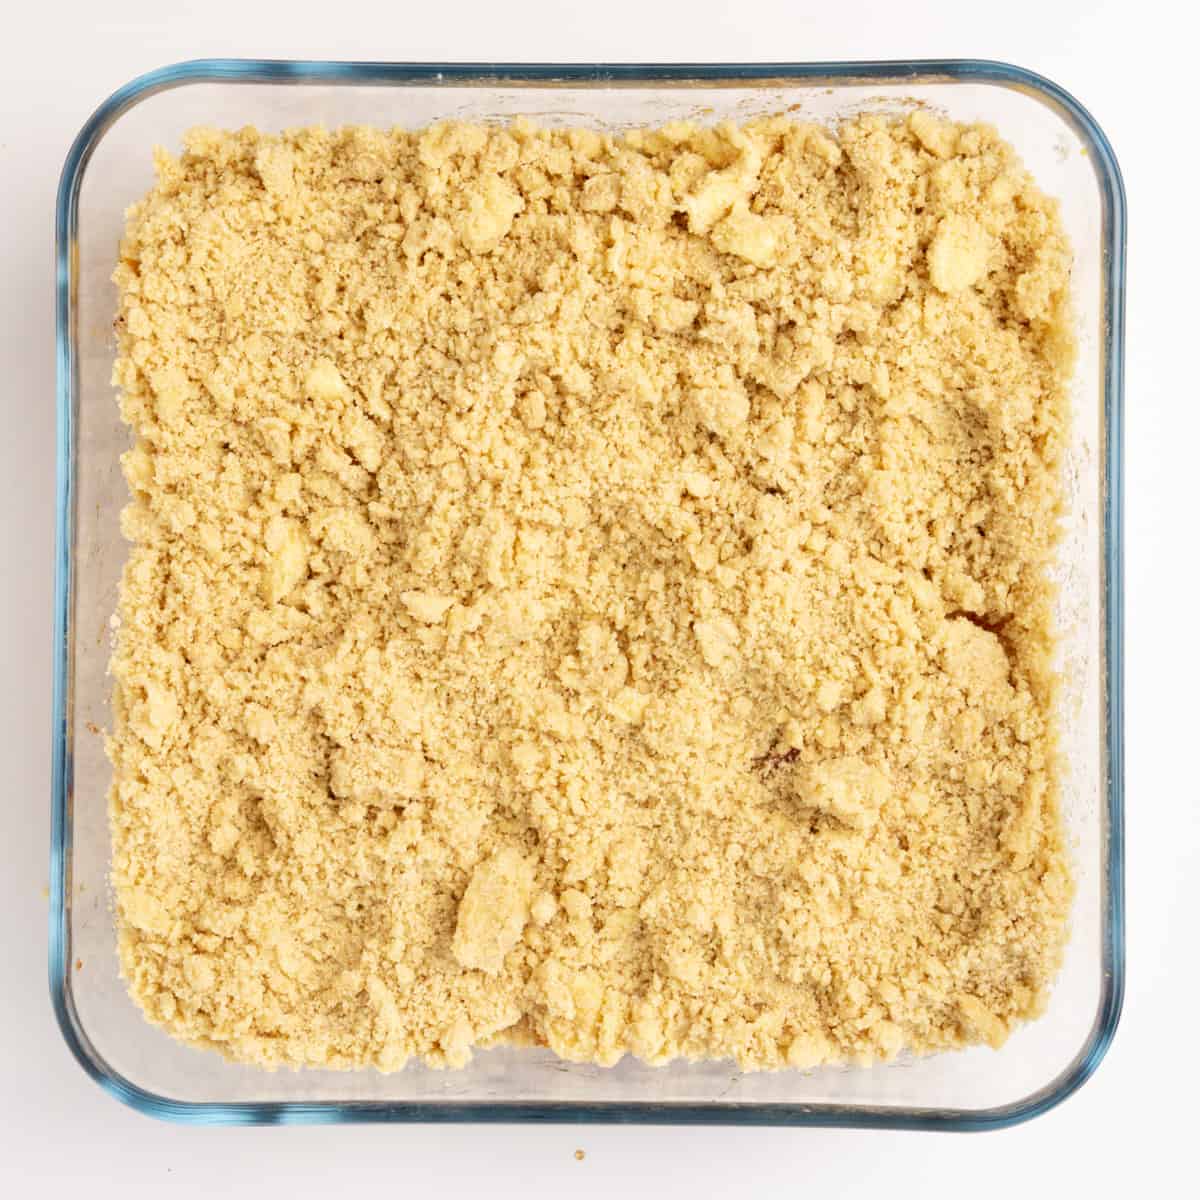 Crumble in a dish ready to bake.